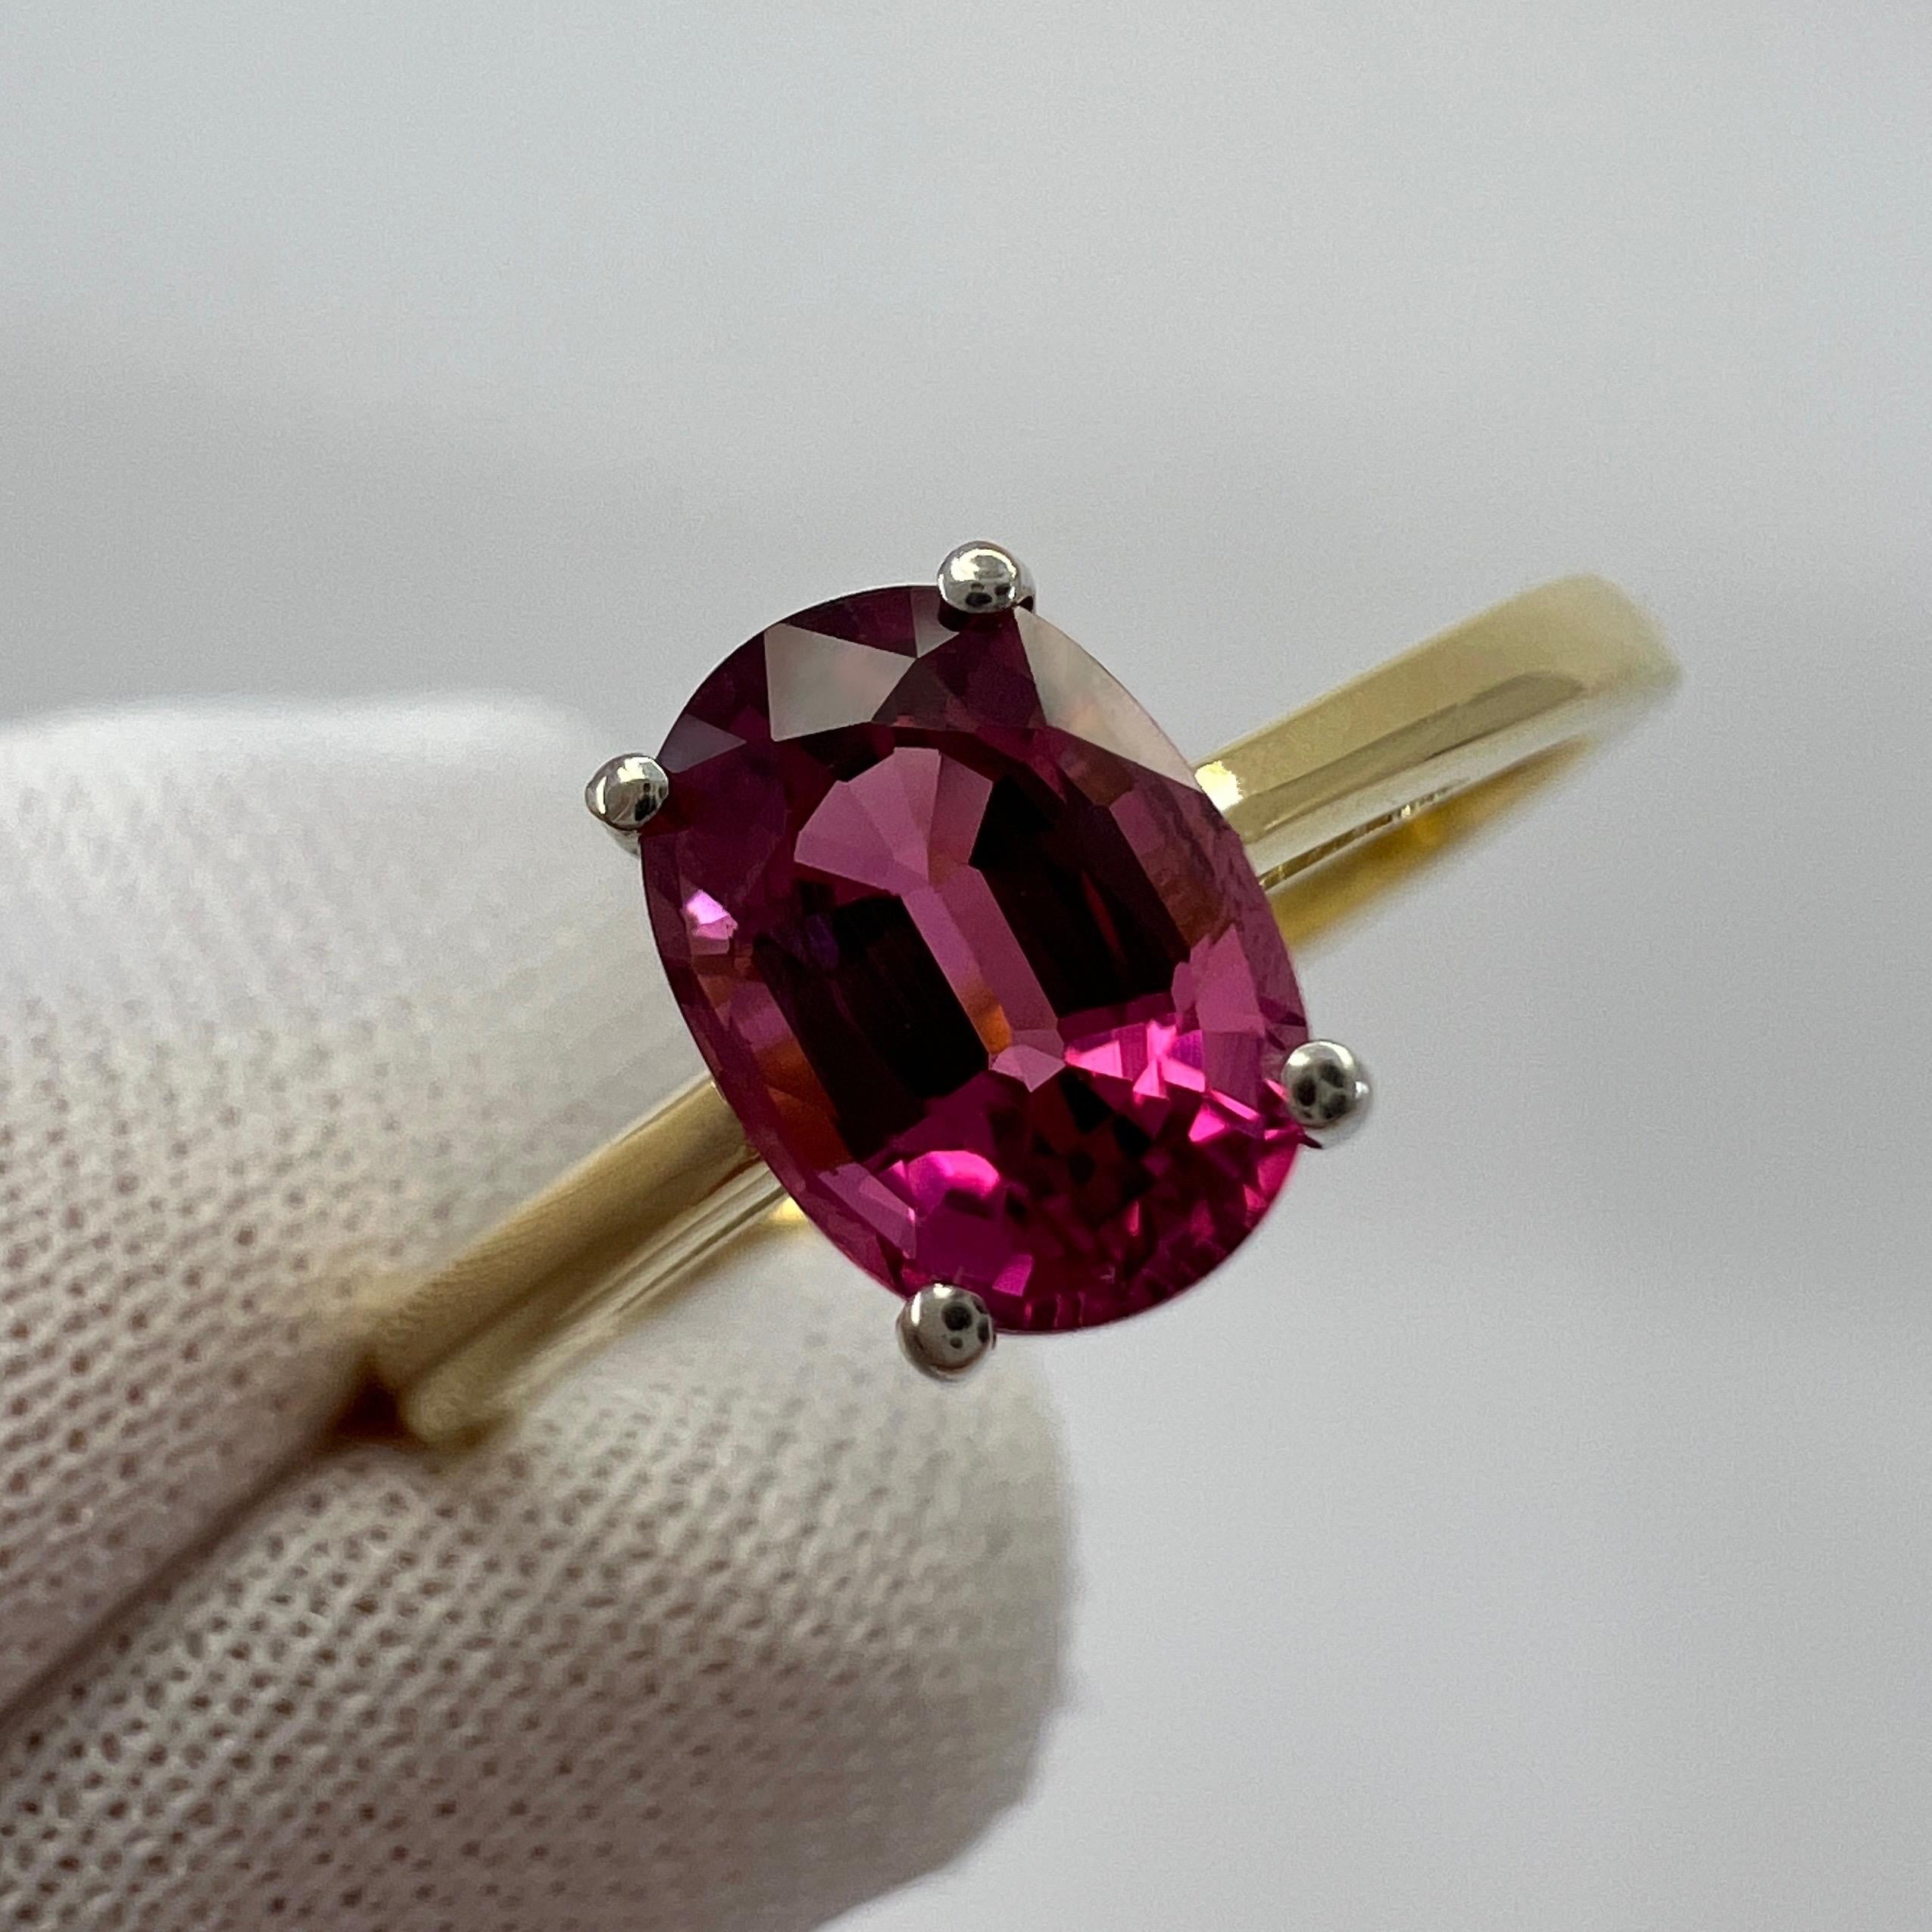 1.10ct Vivid Pink Purple Rubellite Tourmaline Oval Cut 18k Gold Solitaire Ring For Sale 2